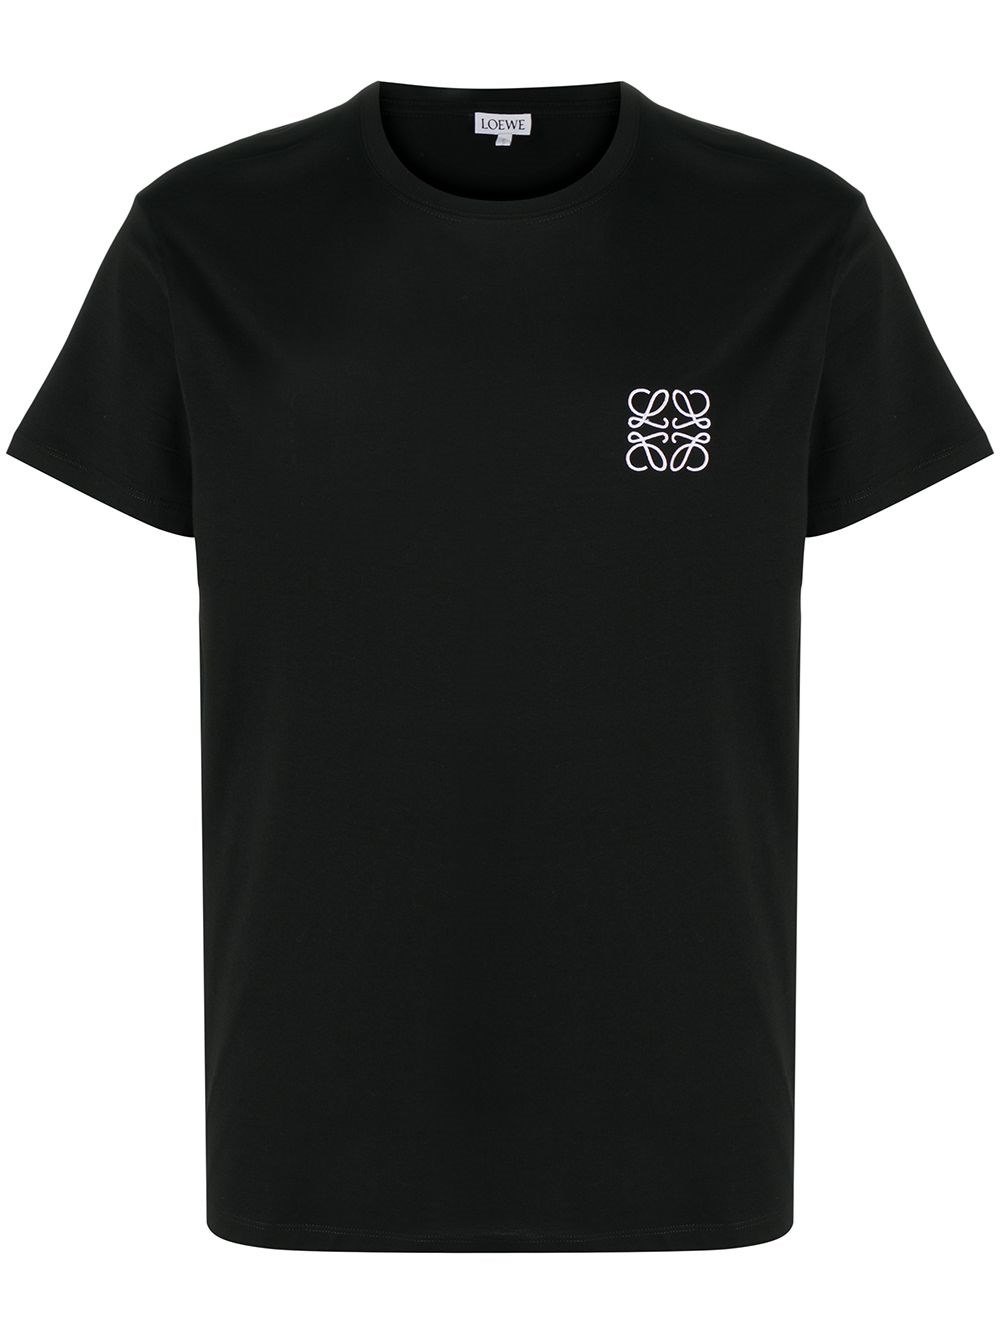 loewe T-SHIRT ANAGRAM available on montiboutique.com - 35798